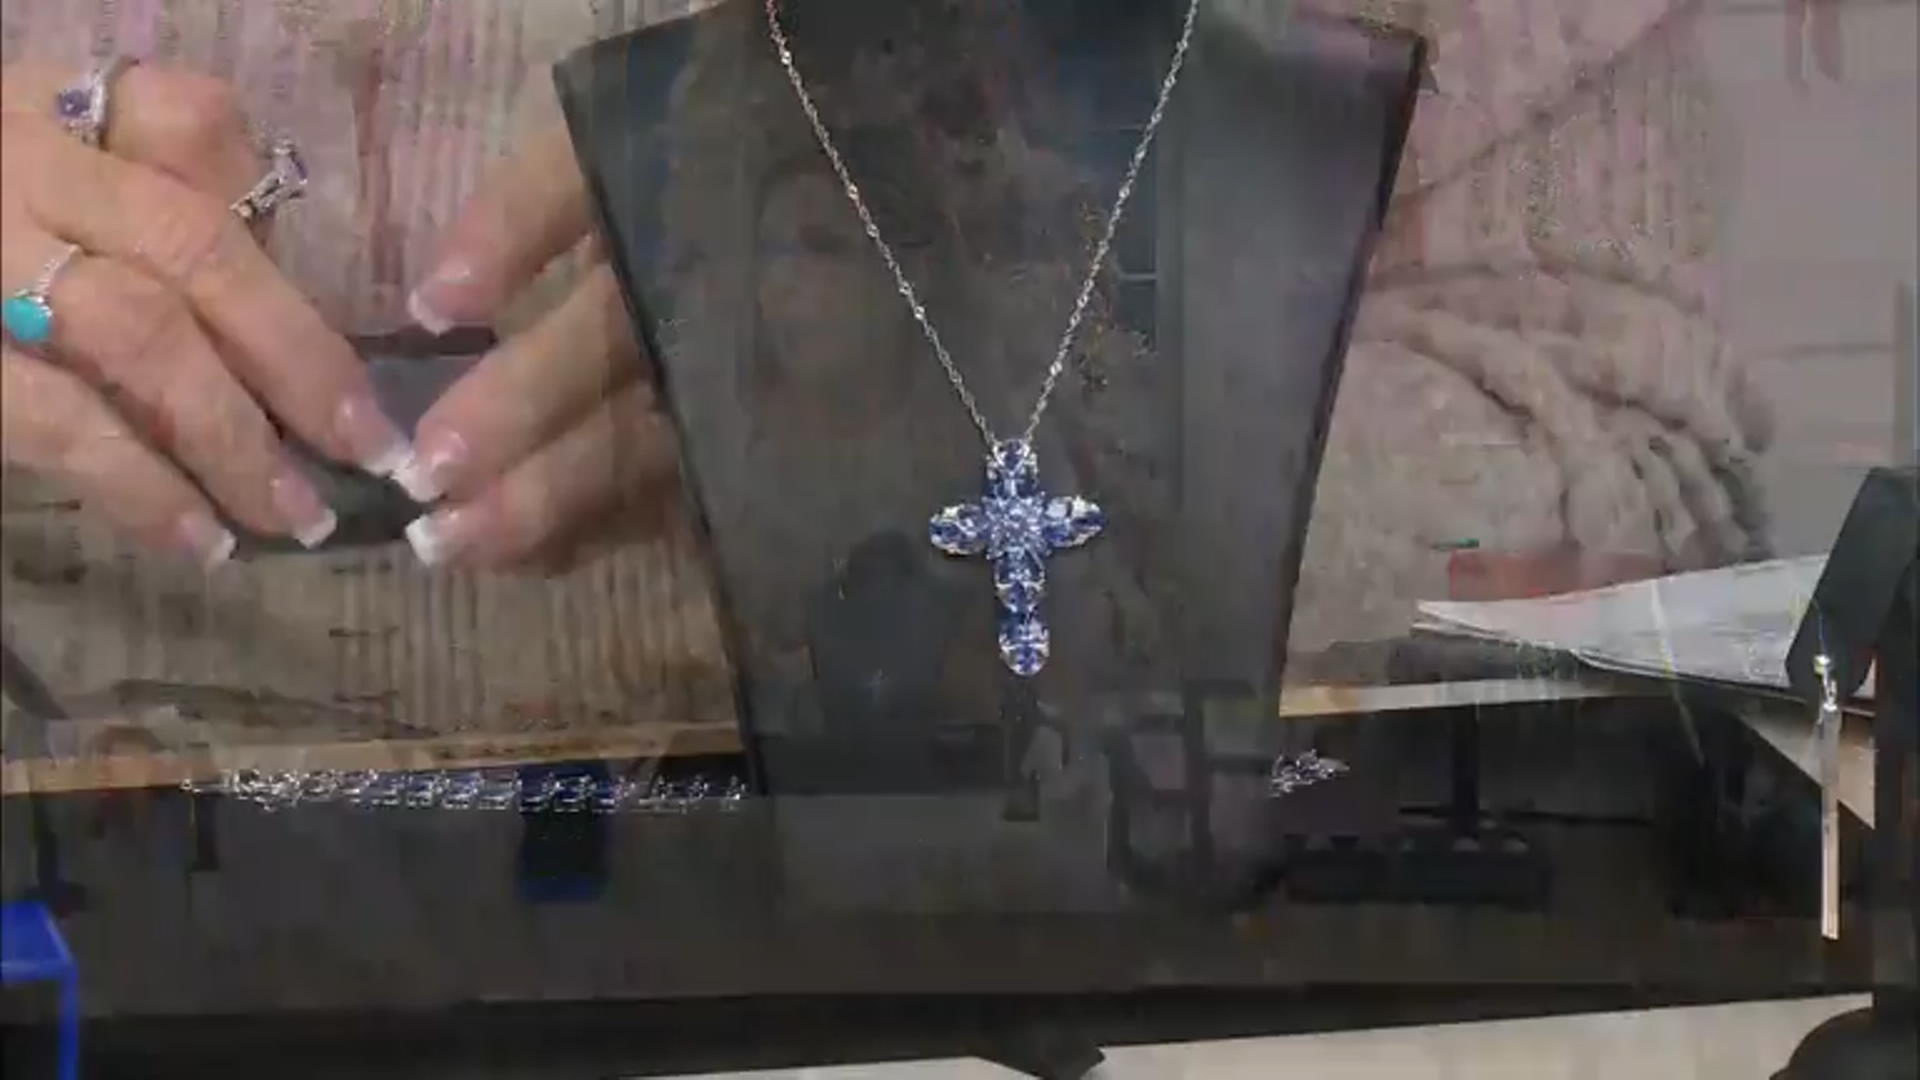 Blue Tanzanite Rhodium Over Sterling Silver Cross Pendant with Chain 5.36ctw Video Thumbnail